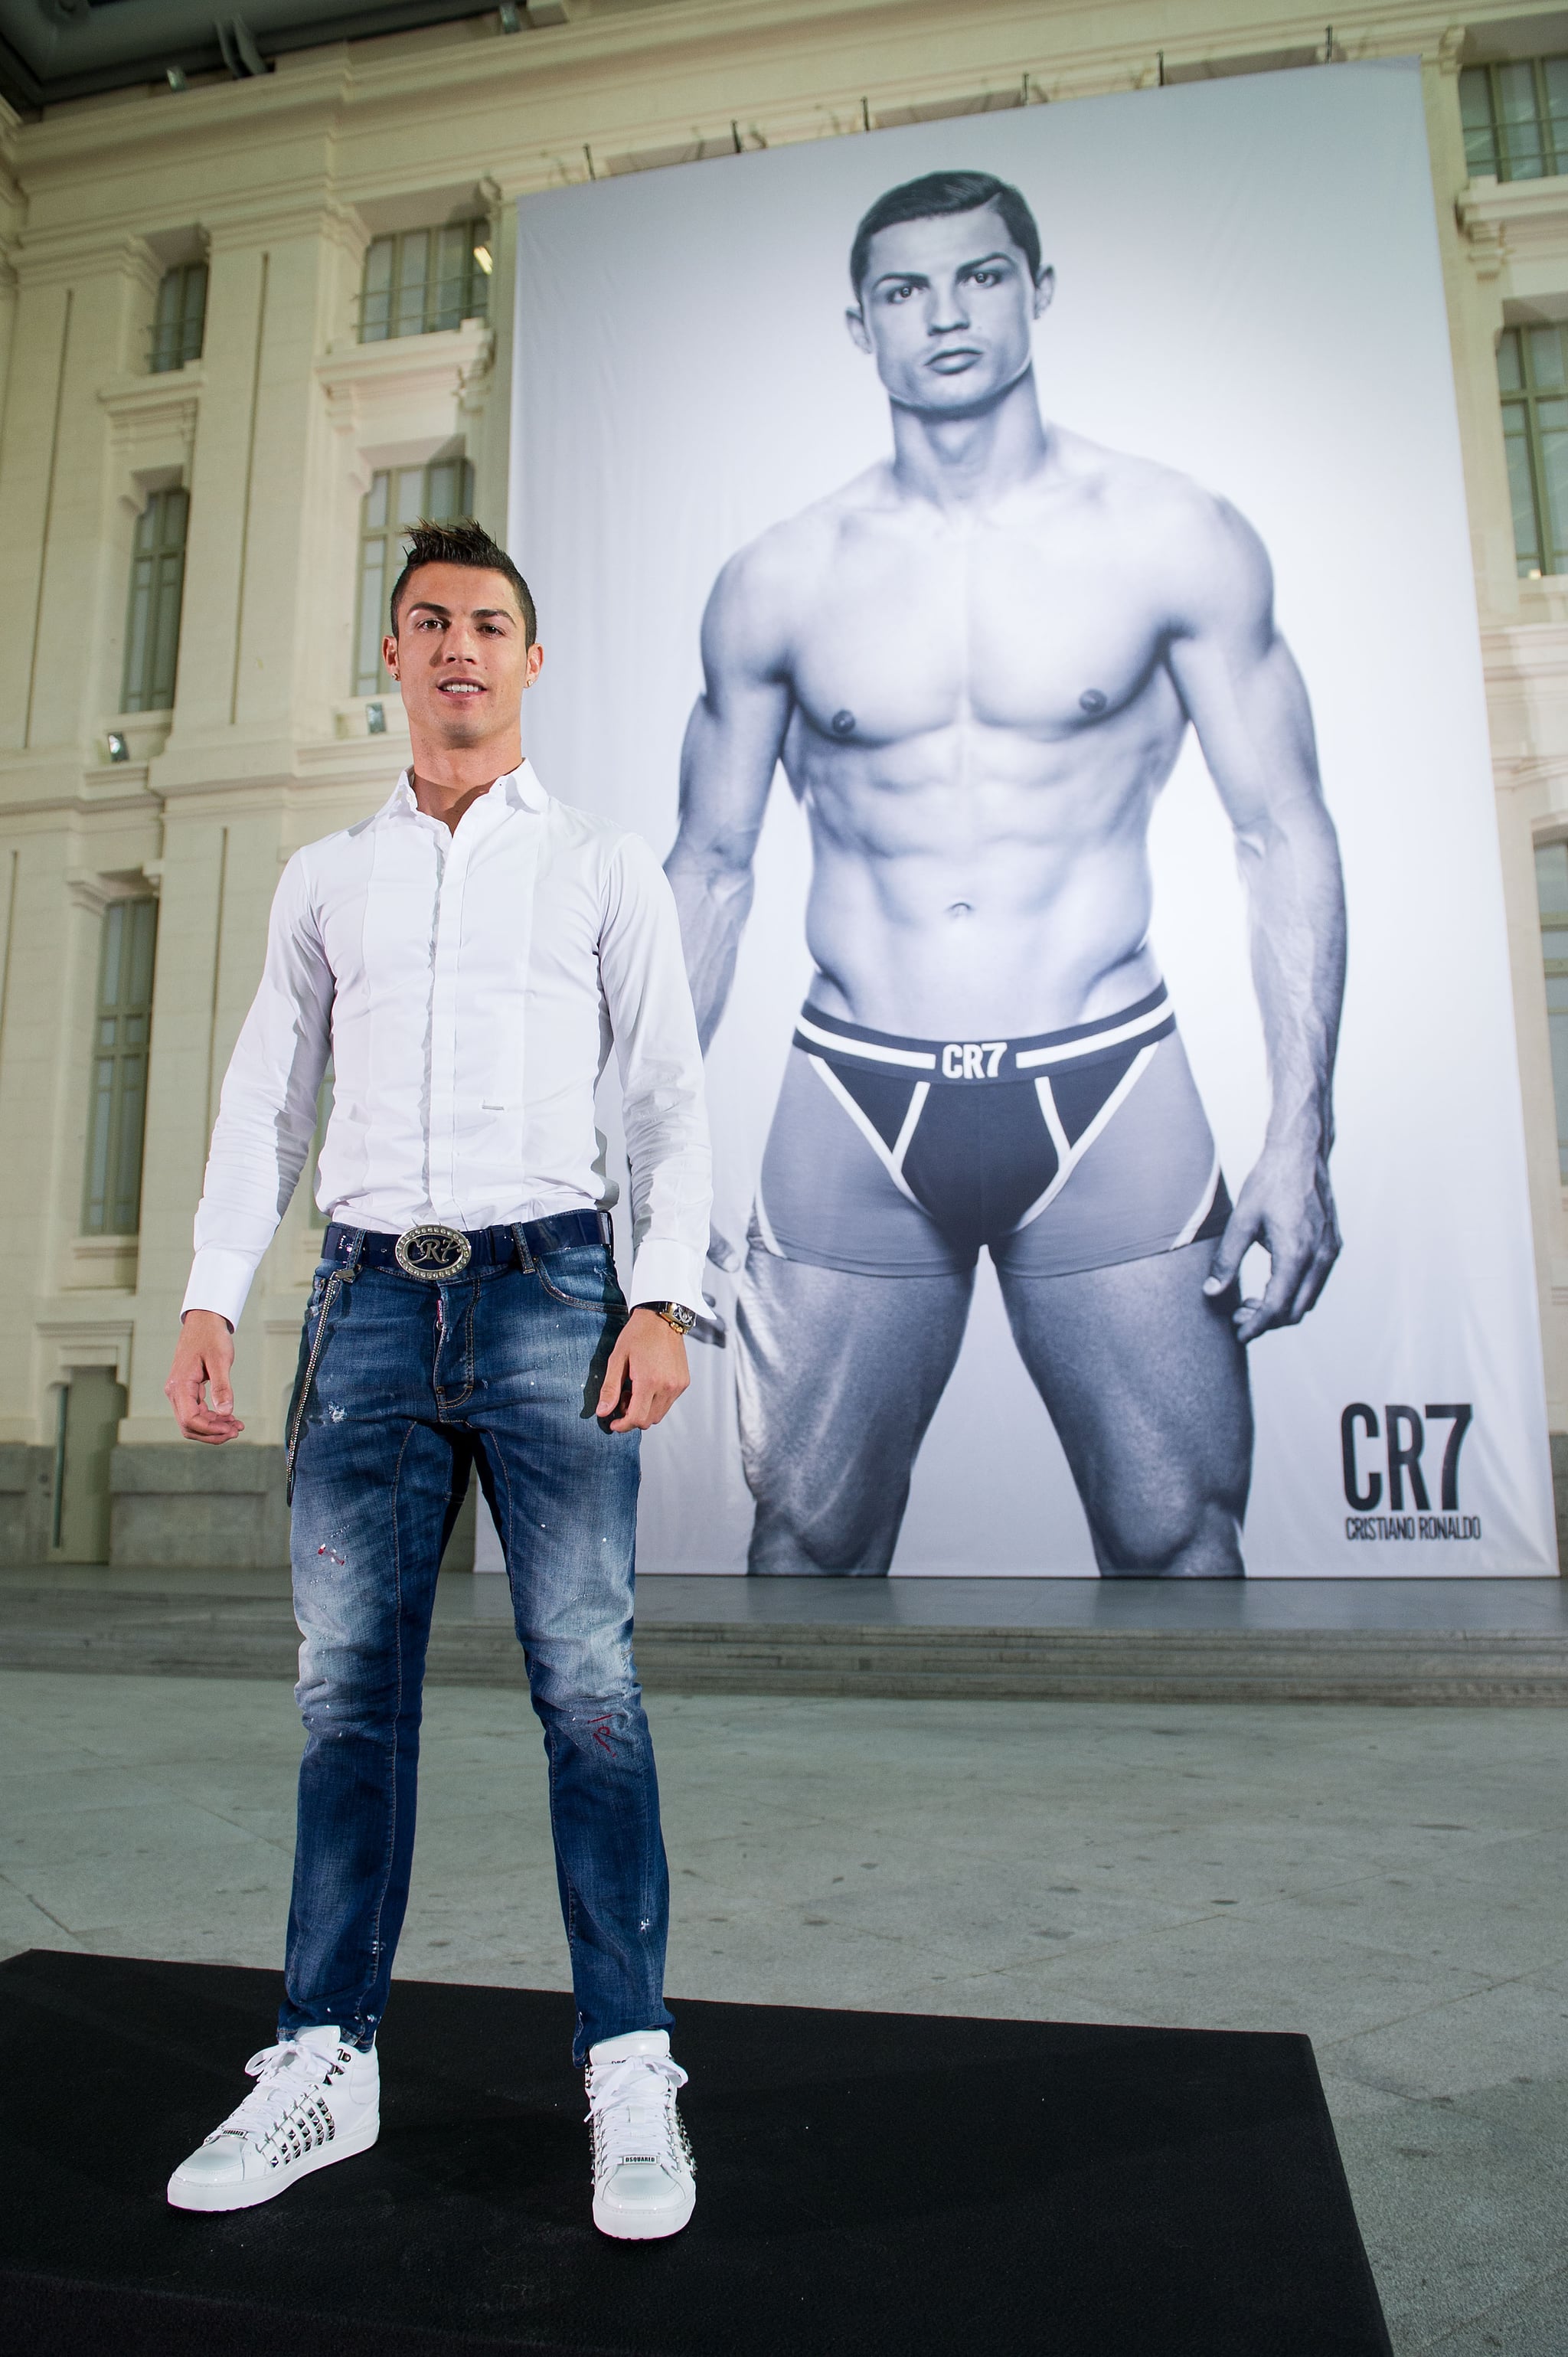 When Cristiano Ronaldo Posed For This Larger-Than-Life Ad